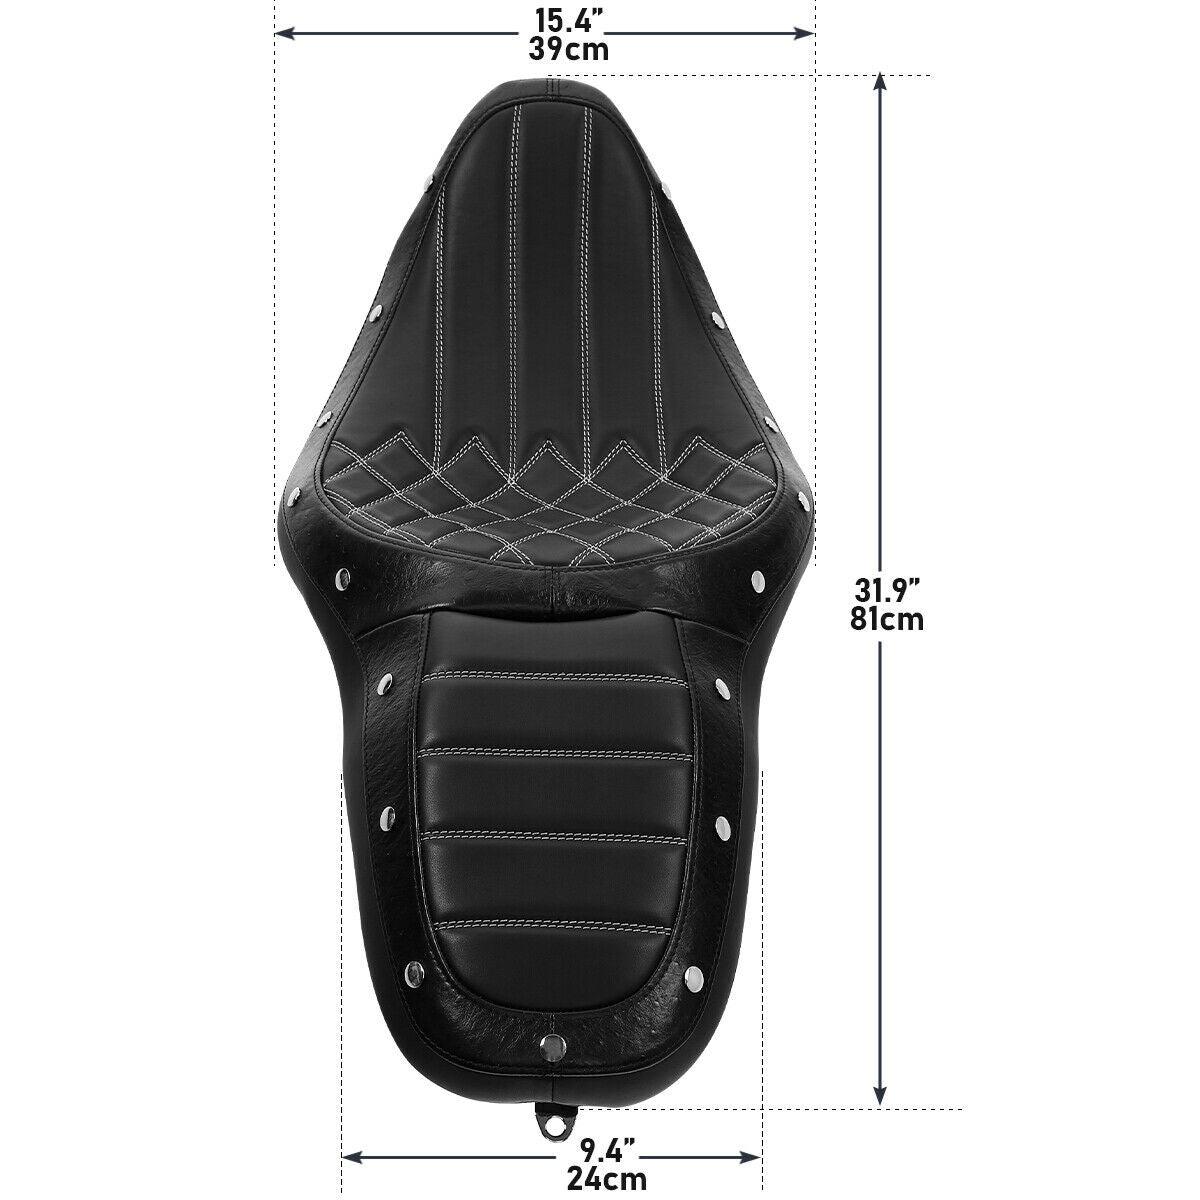 Driver Passenger Seat Fit For Harley Electra Street Road Glide 2009-2021 2016 US - Moto Life Products